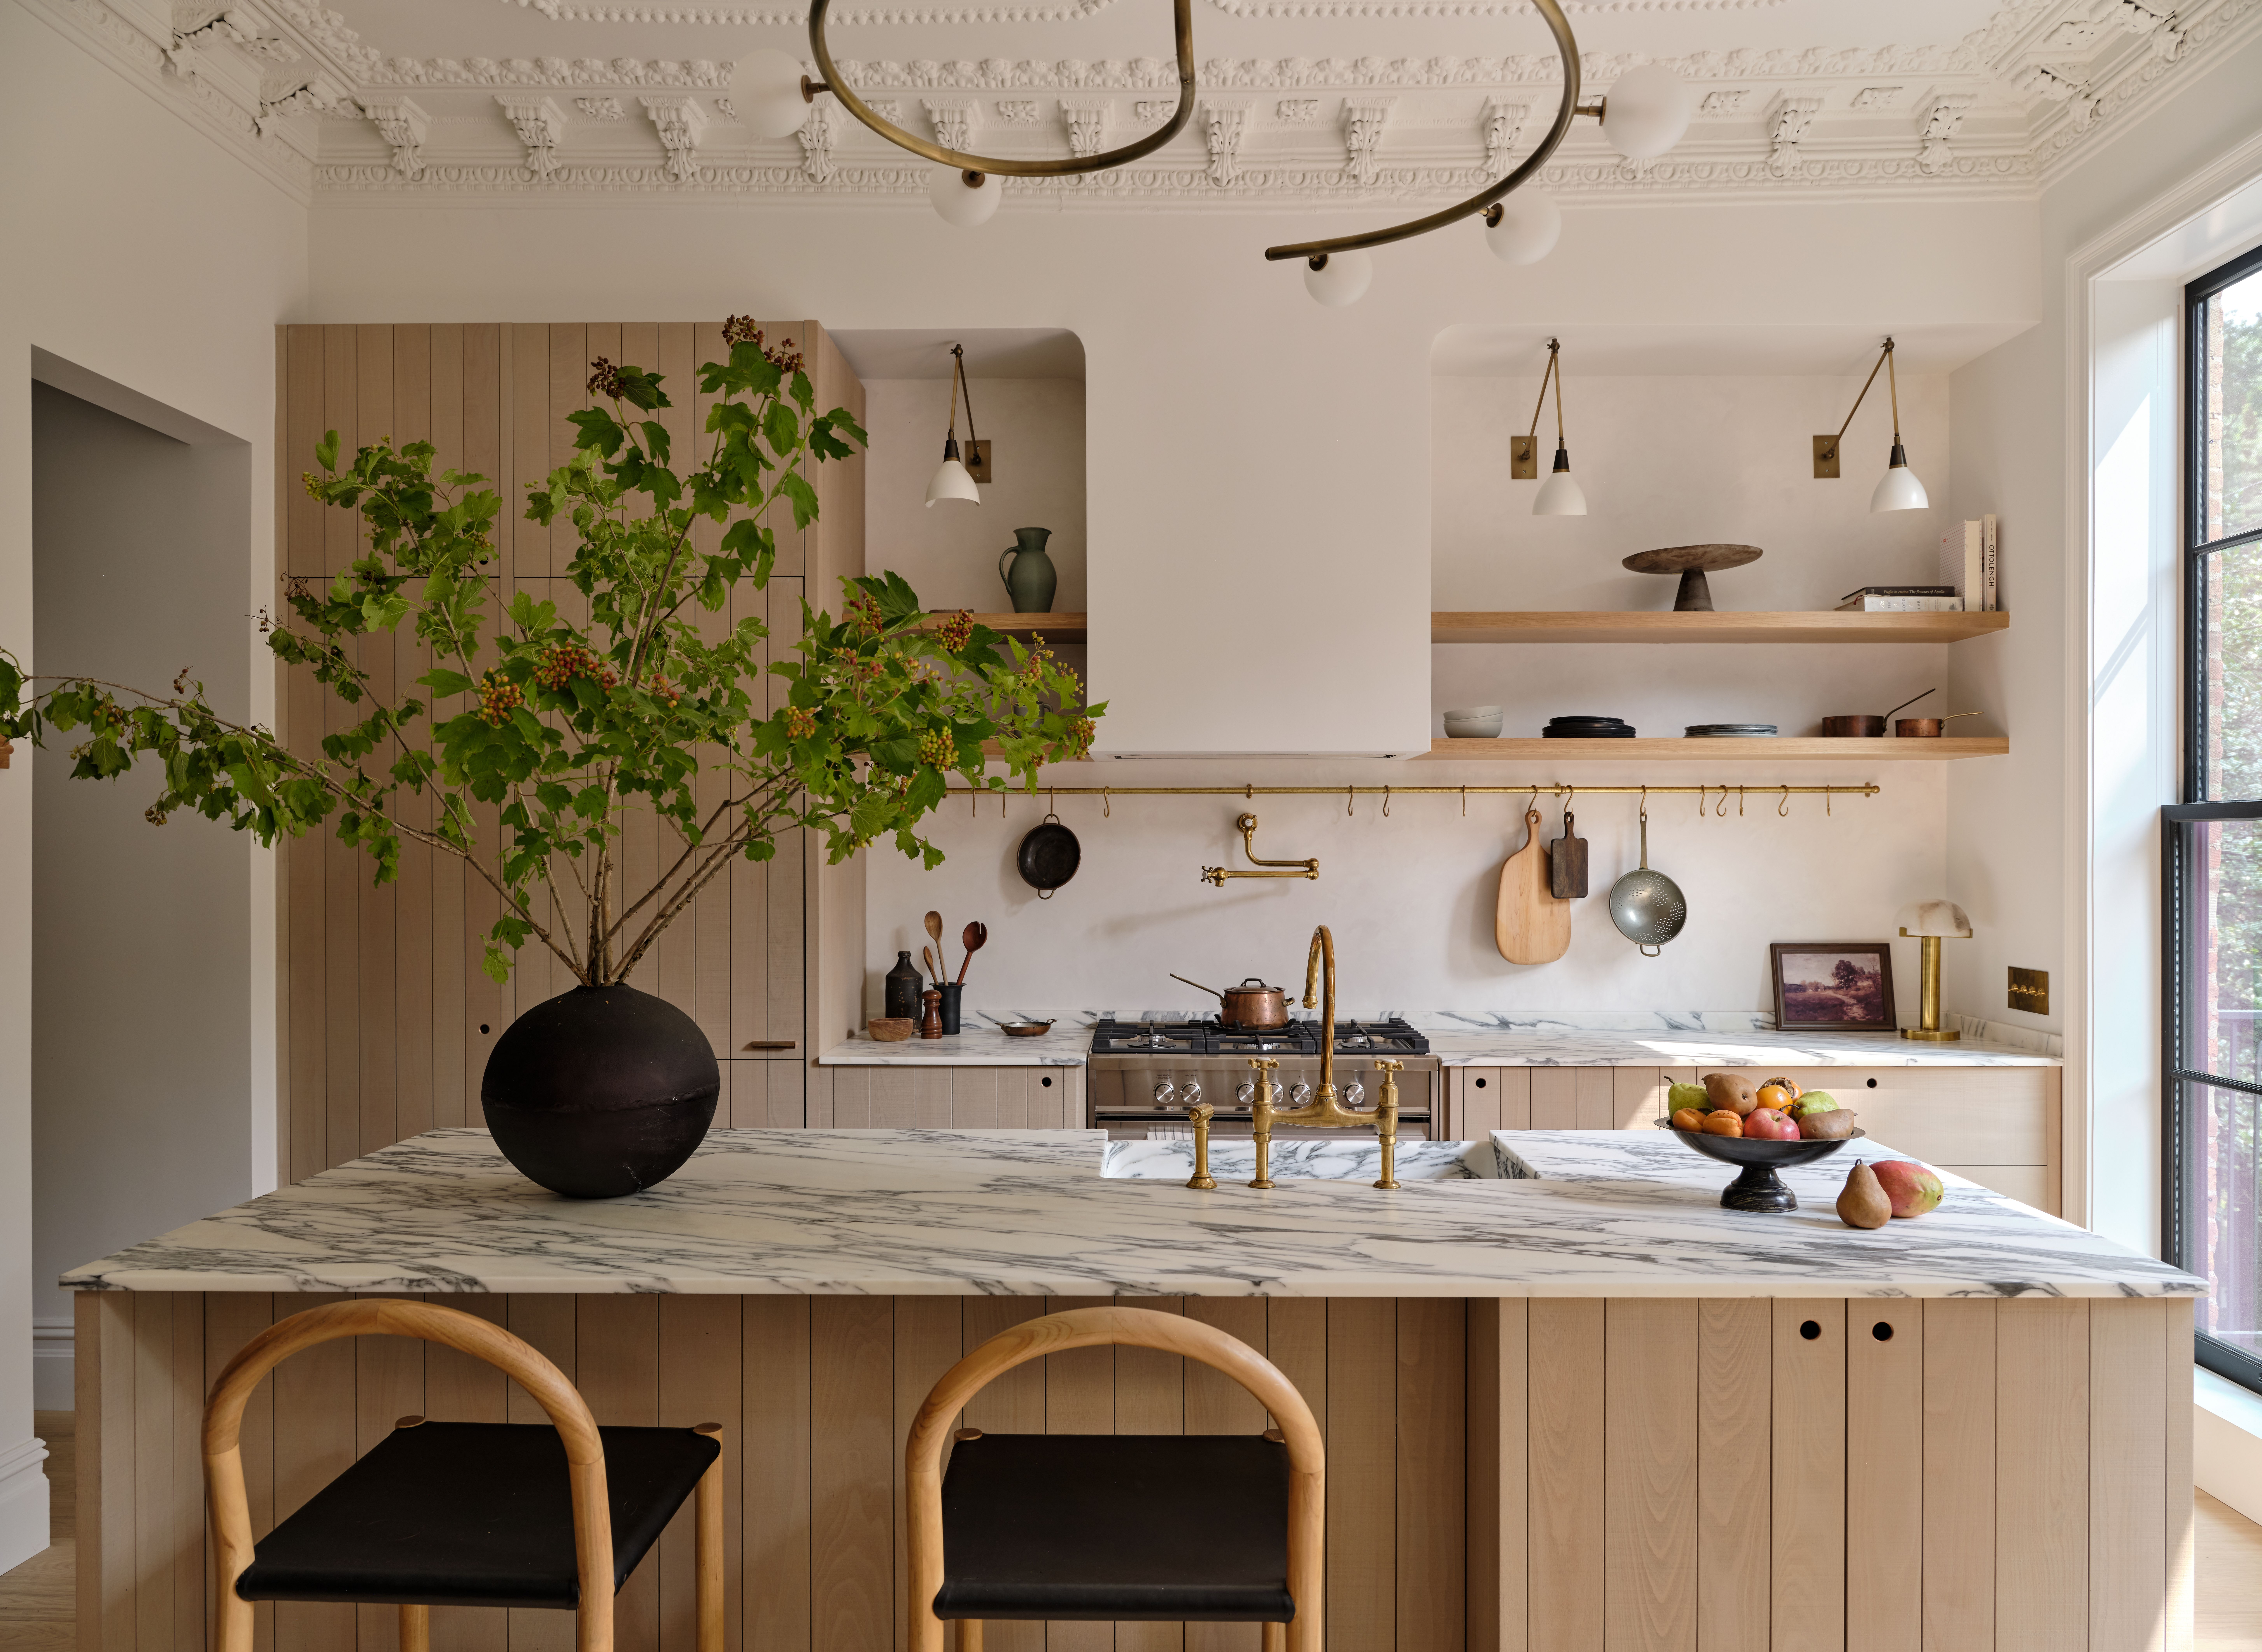 AJ Madison Launches The Kitchen Design Collective